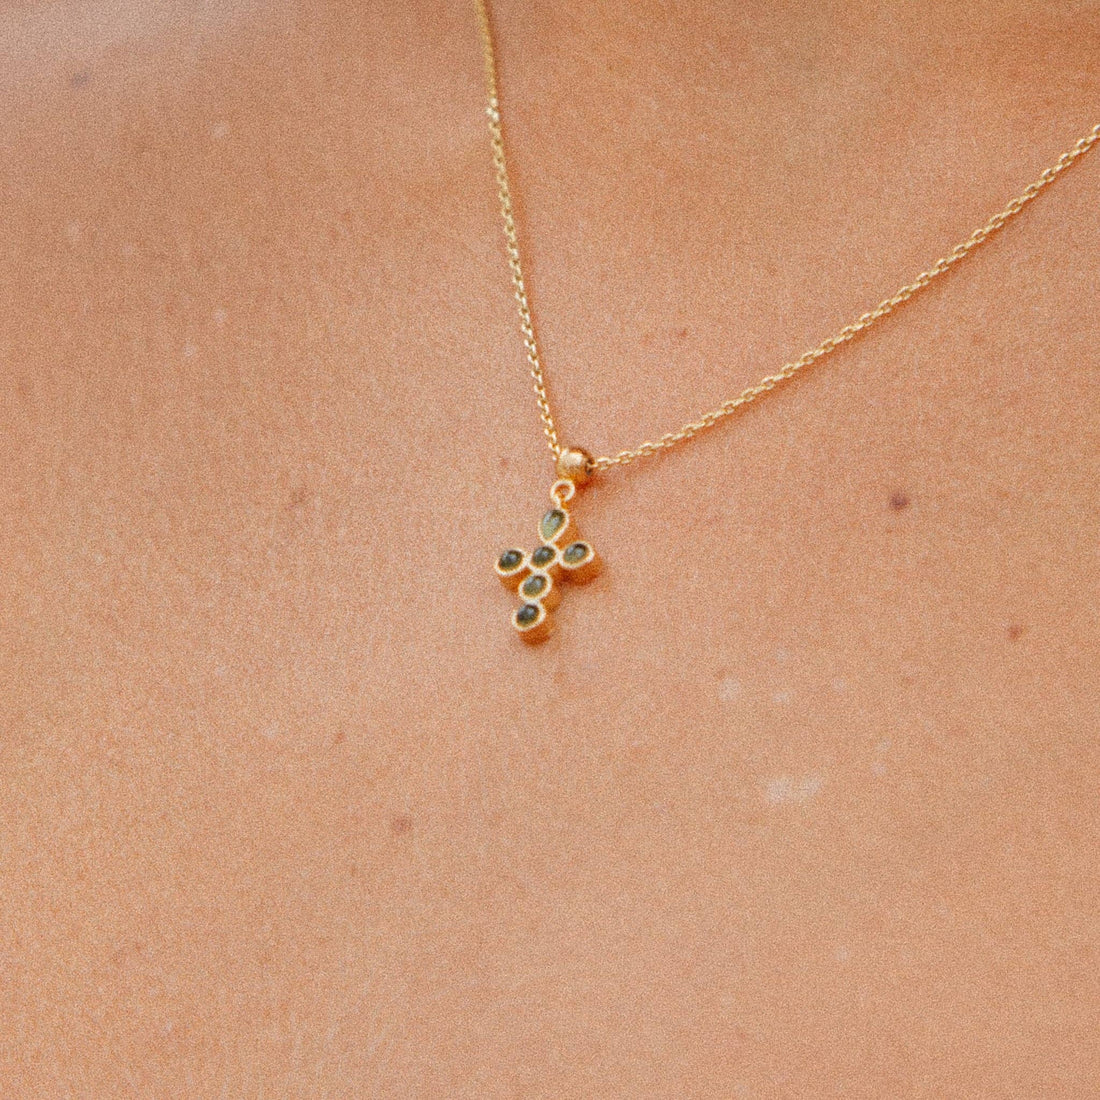 Molì Charm | Jewelry Gold Gift Waterproof: Charm + Chain Necklace